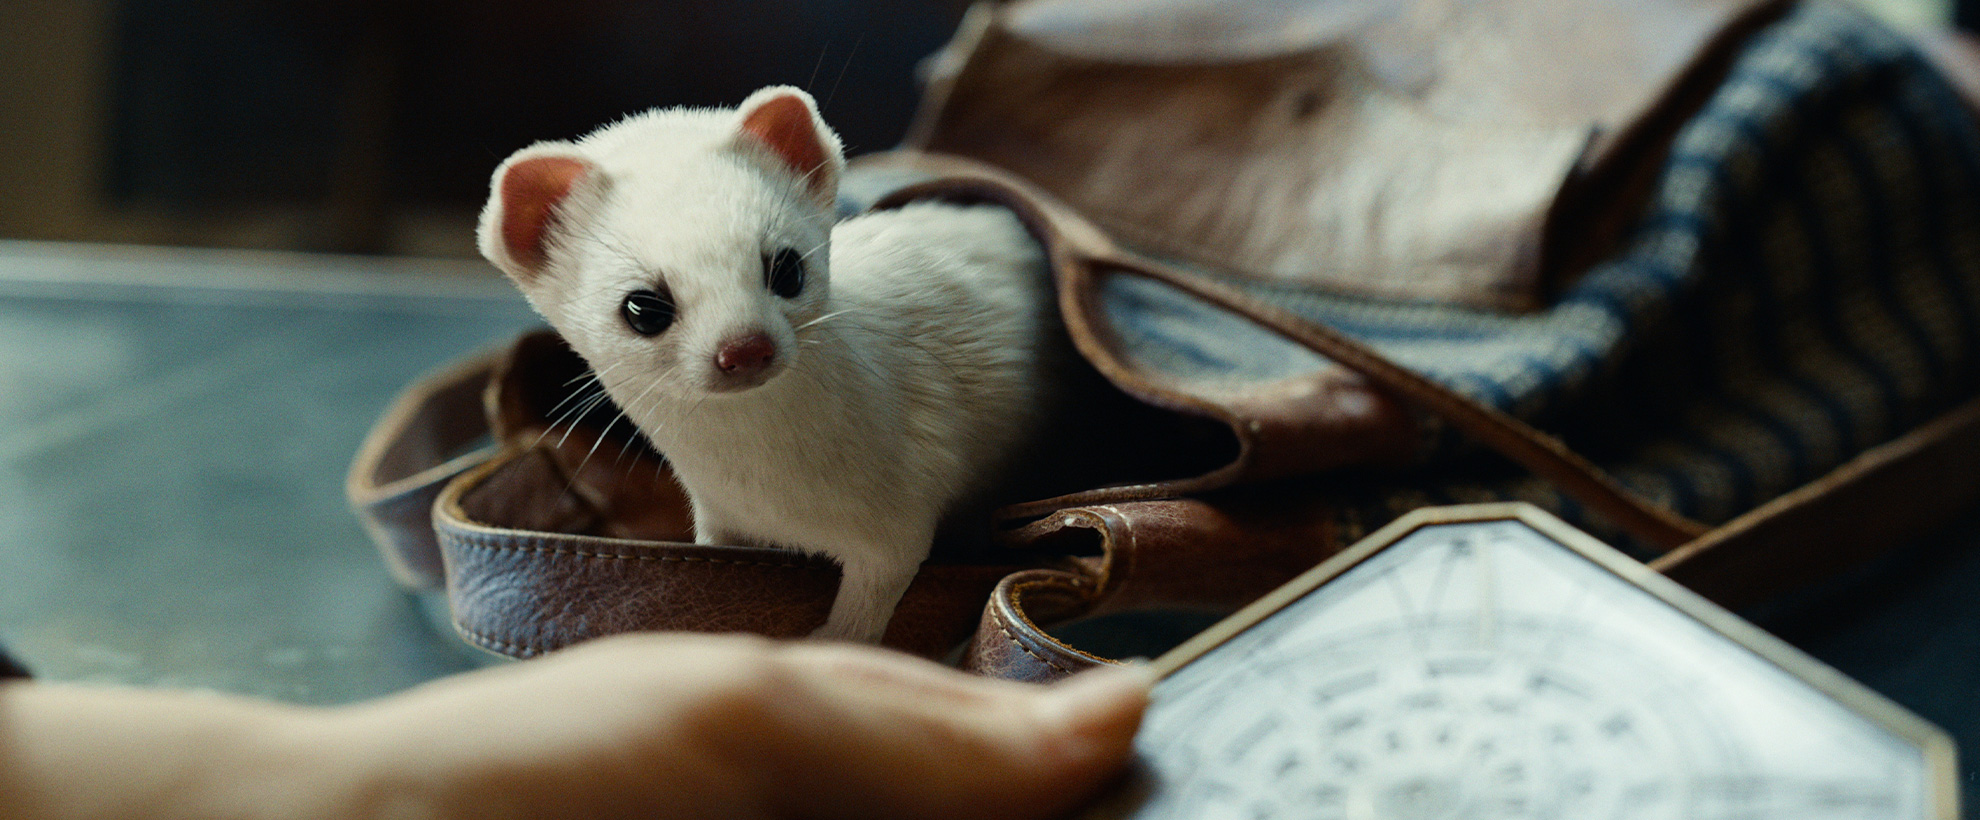 A small white ferret pokes its head out of a brown leather bag